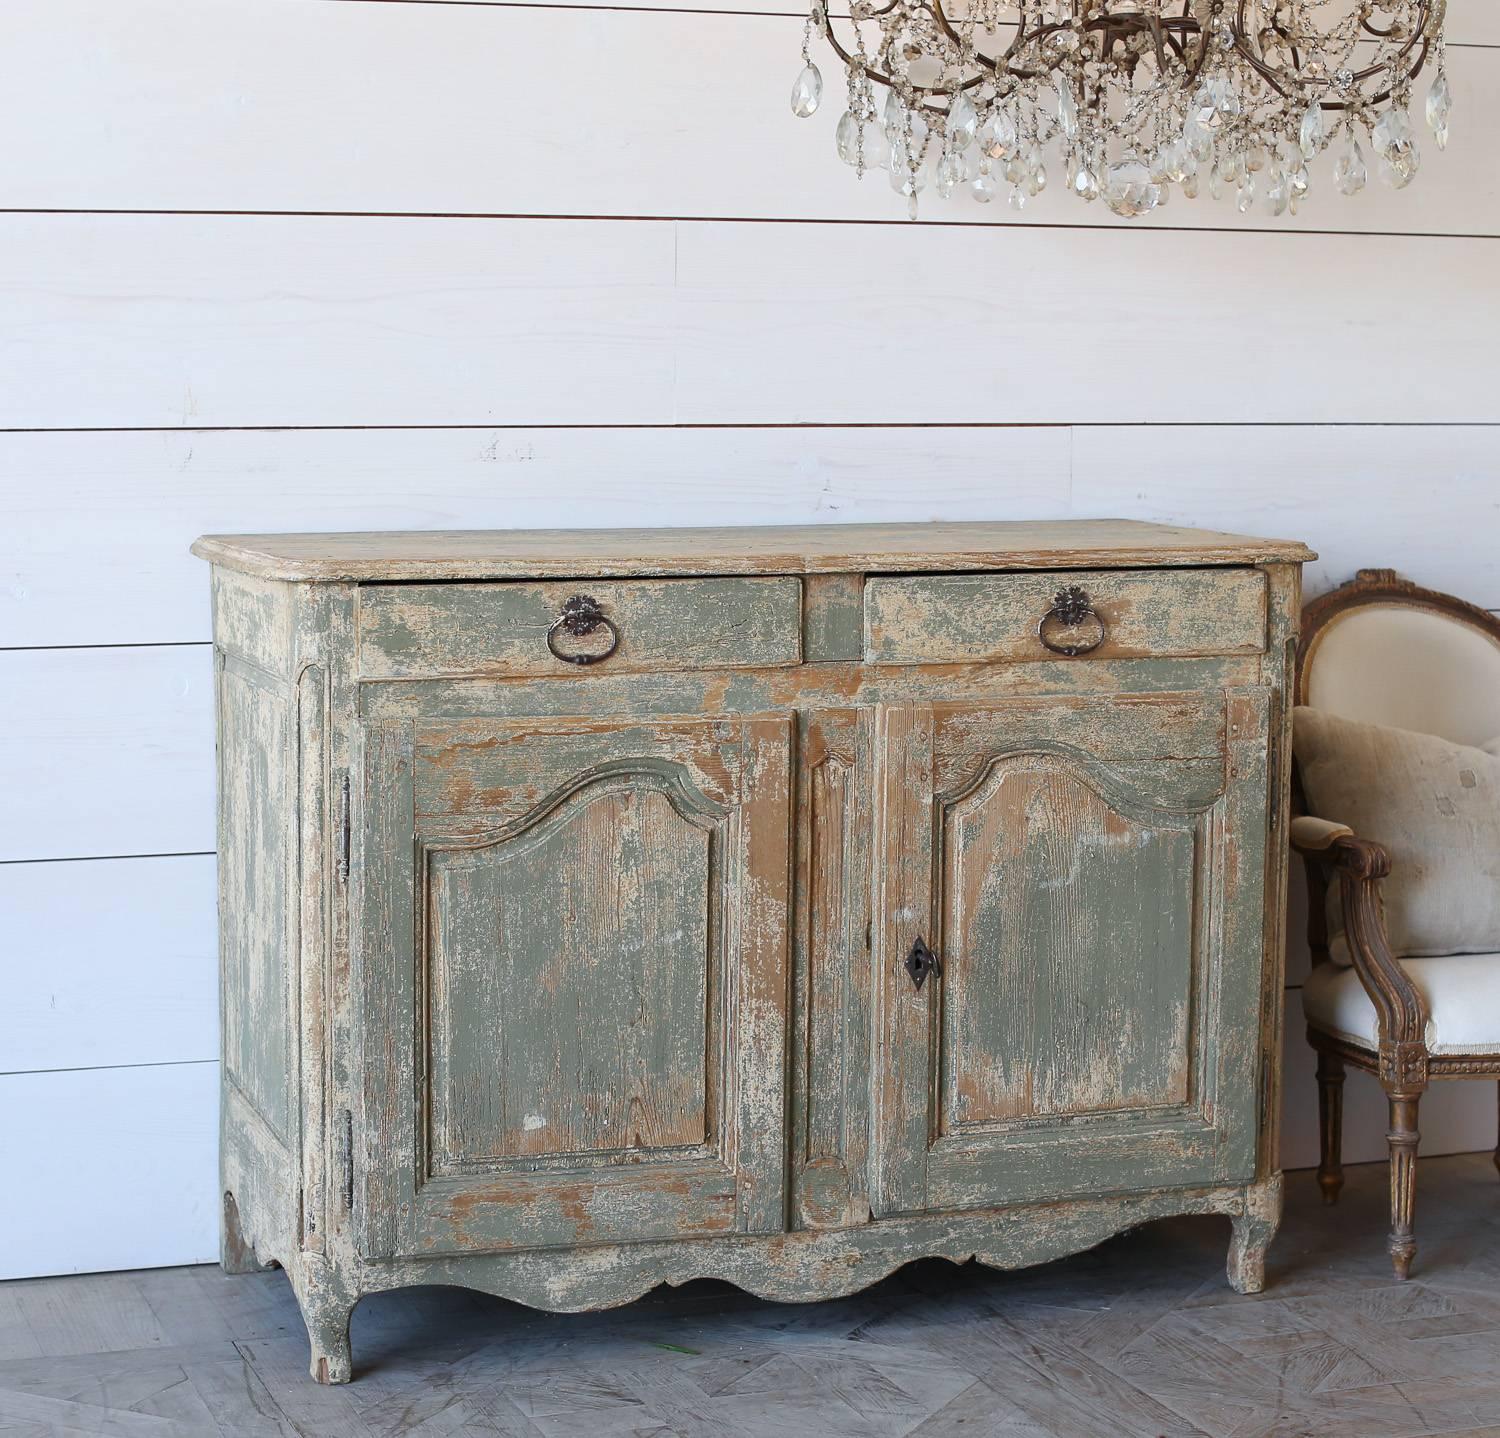 Rustic sideboard made of Old Pine and washed in a worn green finish. Two top drawers and cabinets provide ample storage along with the antique hardware and working lock for a unique touch.
 